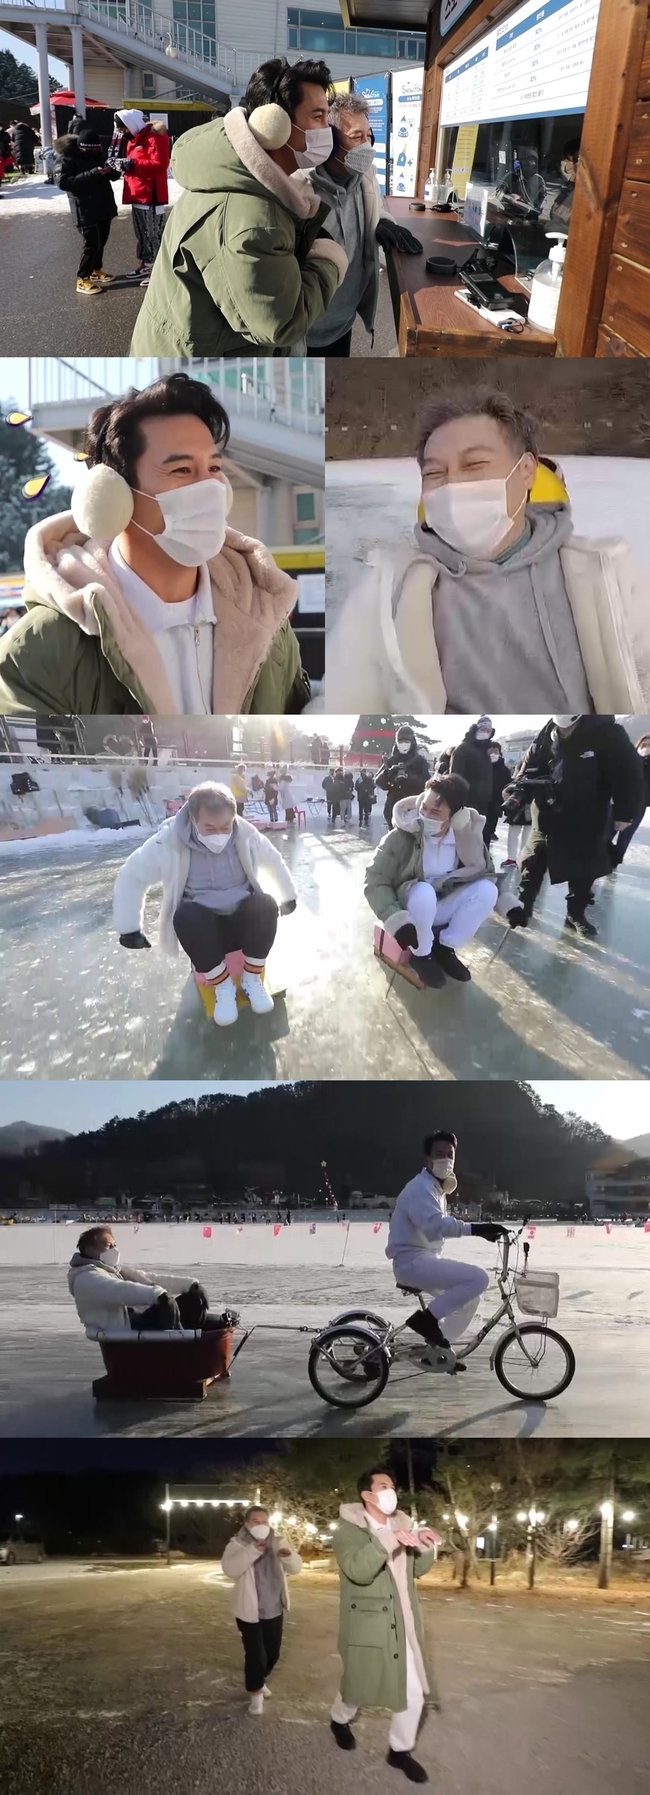 Kim Kap-soo and Jang Min-Ho face a snag at a snow sledIn the KBS 2TV entertainment program The New Family Relationship Certificate The Last Godfather (hereinafter referred to as The Last Godfather), so-called Deer Wealthy Kim Kap-soo and Jang Min-Ho visit the snow sledding to enjoy the winter.Kim Kap-soo and Jang Min-Ho enter the snow sled and are delighted like a child.Kim Kap-soo is excited to show Jang Min-Hos No Correct dance, but they face a crisis in front of the ticket office.Kim Kap-soo is greatly embarrassed to hear from the ticket office staff; Jang Min-Ho is sweating, saying he was shocked by the firm employees response.From the beginning of the snow sledge, curiosity is amplified about what happened to deer Wealthy.Chemie, a tit-for-tat of Deer Wealthy, also runs in the 19th episode of The Last Godfather.Kim Kap-soo and Jang Min-Ho, who bet every time they play the game, find a snow sled, and they play a winter-related game and burn their desire to win.In addition, Kim Kap-soo and Jang Min-Ho are the back door of the snow sled like Teachin.The audiences attention is focused on the big role that Deer Wealthy, which shows the sense of entertainment, will show in The Last Godfather.